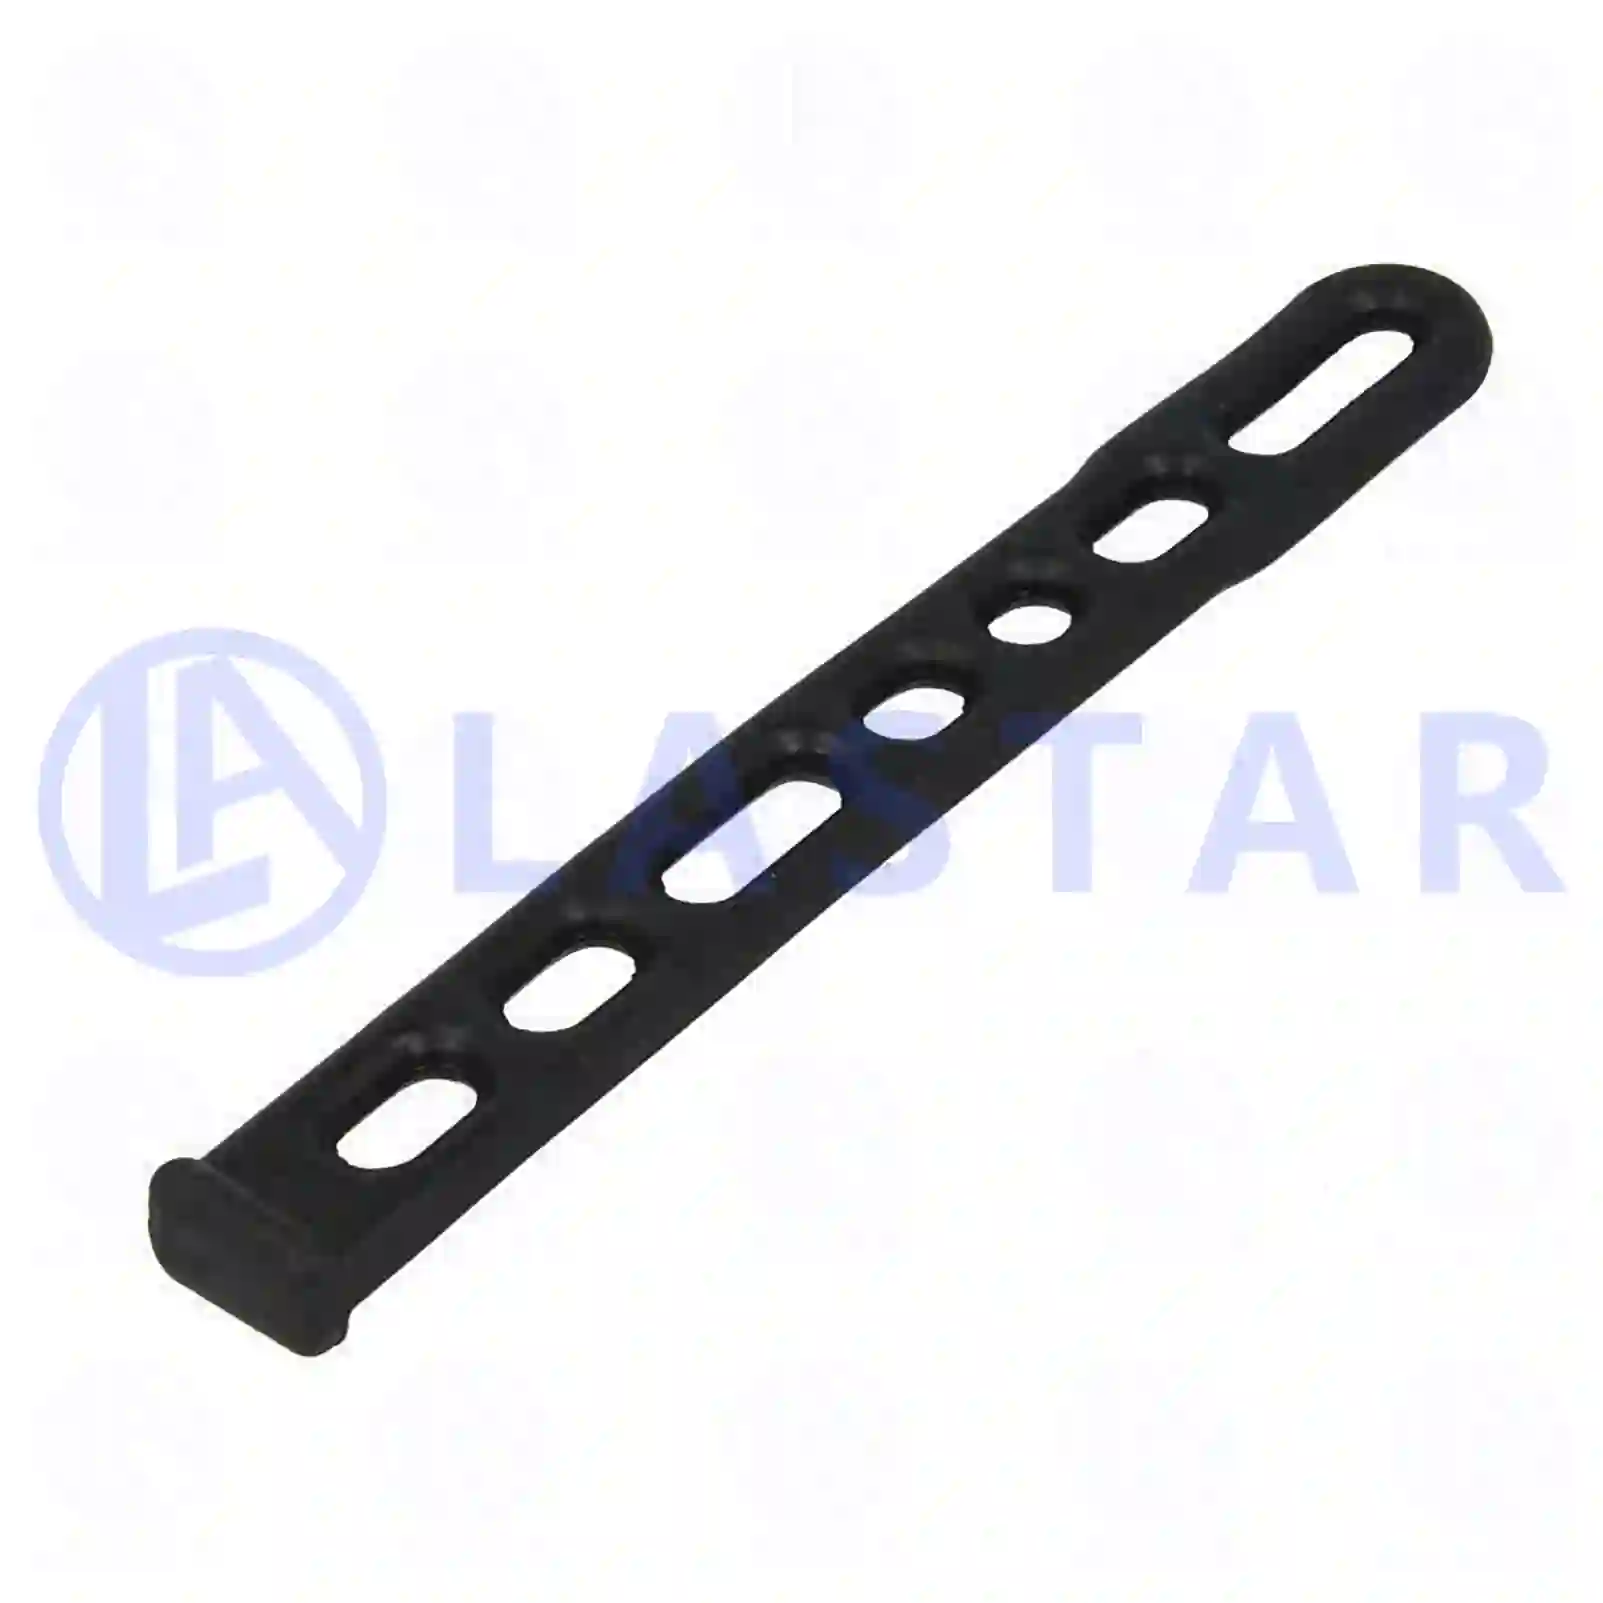 Tensioning band, 77721040, 7408156556, 81565 ||  77721040 Lastar Spare Part | Truck Spare Parts, Auotomotive Spare Parts Tensioning band, 77721040, 7408156556, 81565 ||  77721040 Lastar Spare Part | Truck Spare Parts, Auotomotive Spare Parts